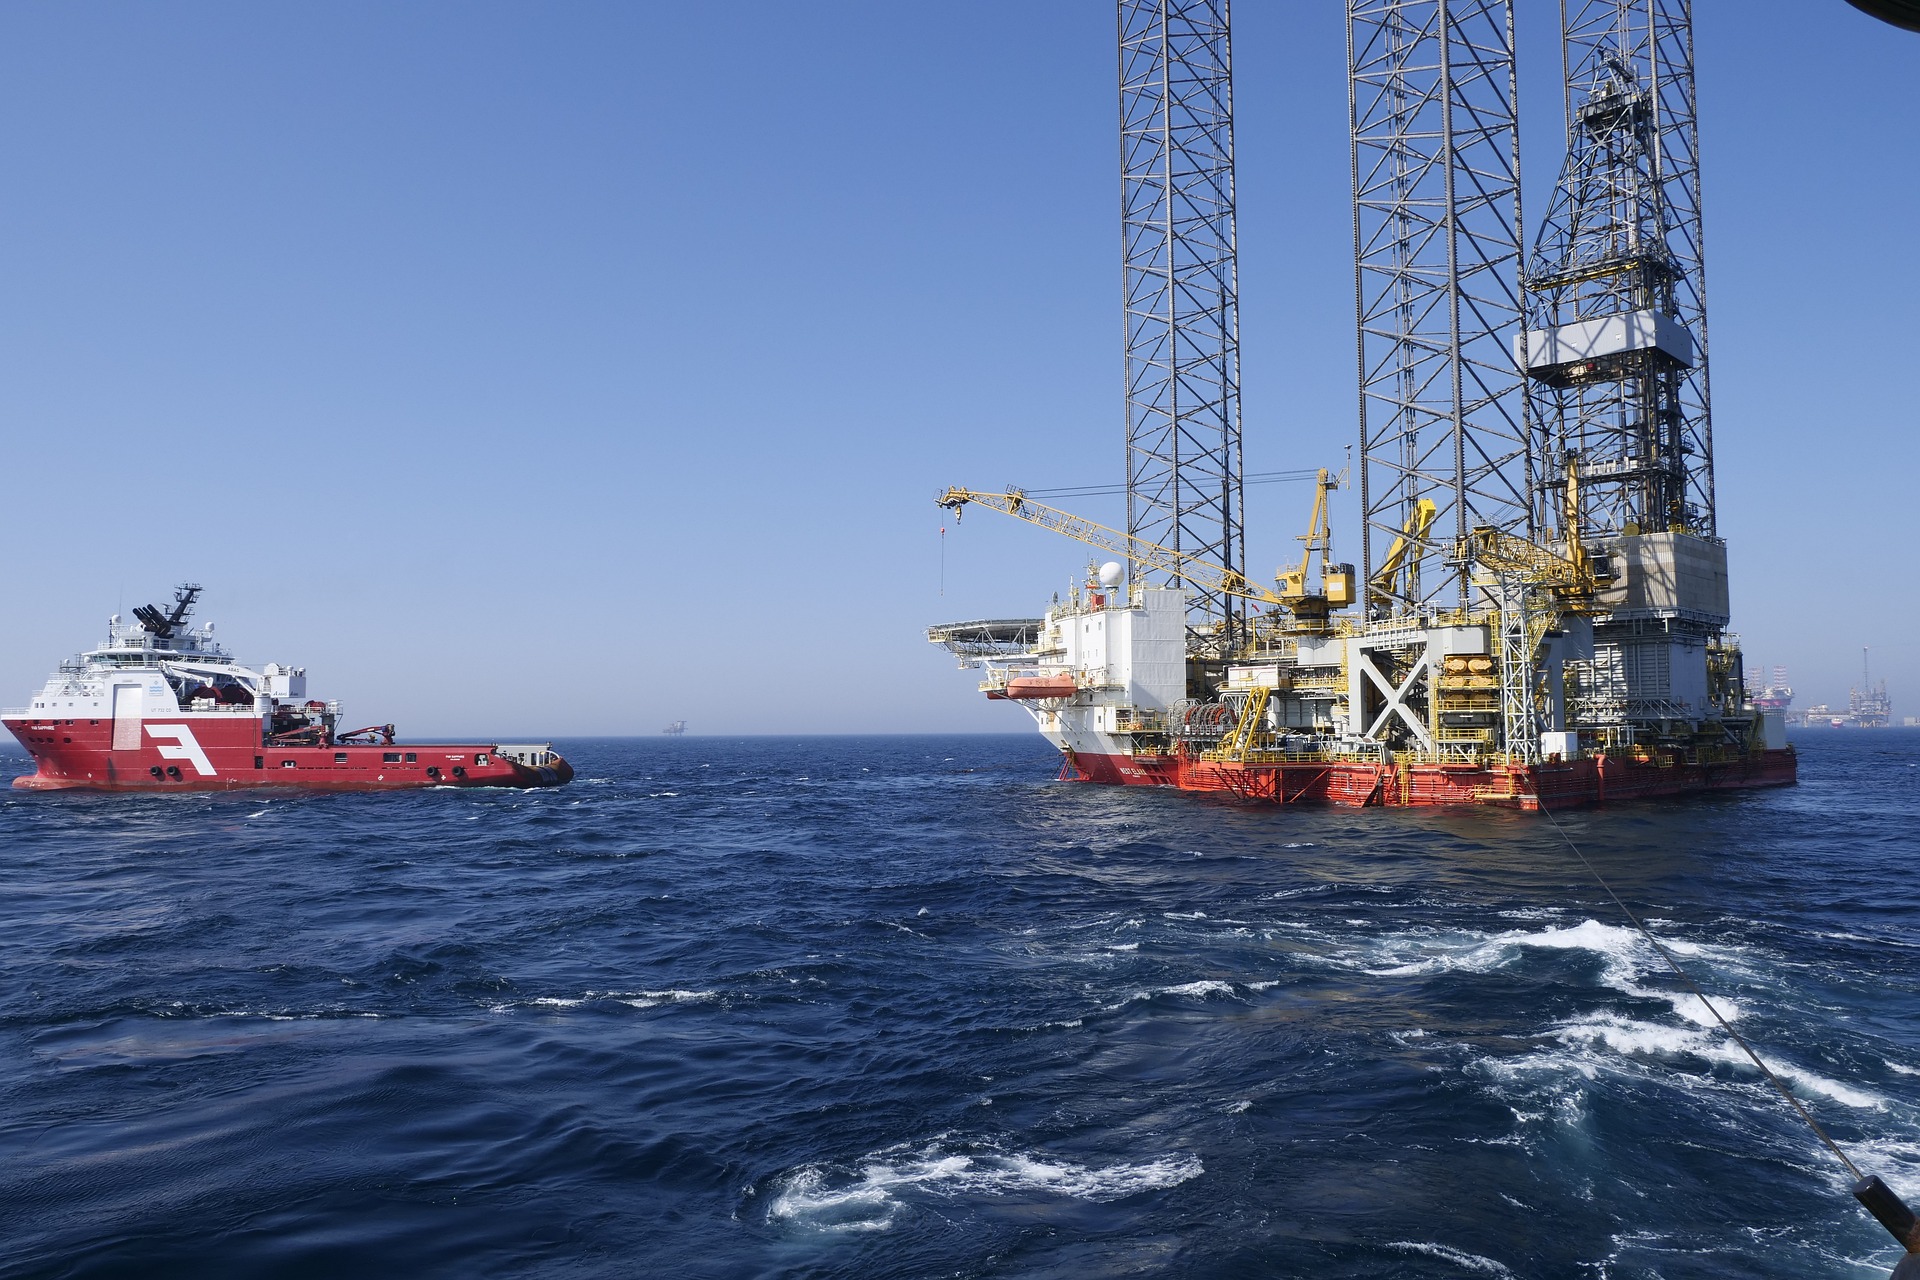 Seismic research for natgas exploration west, southwest of Crete completed